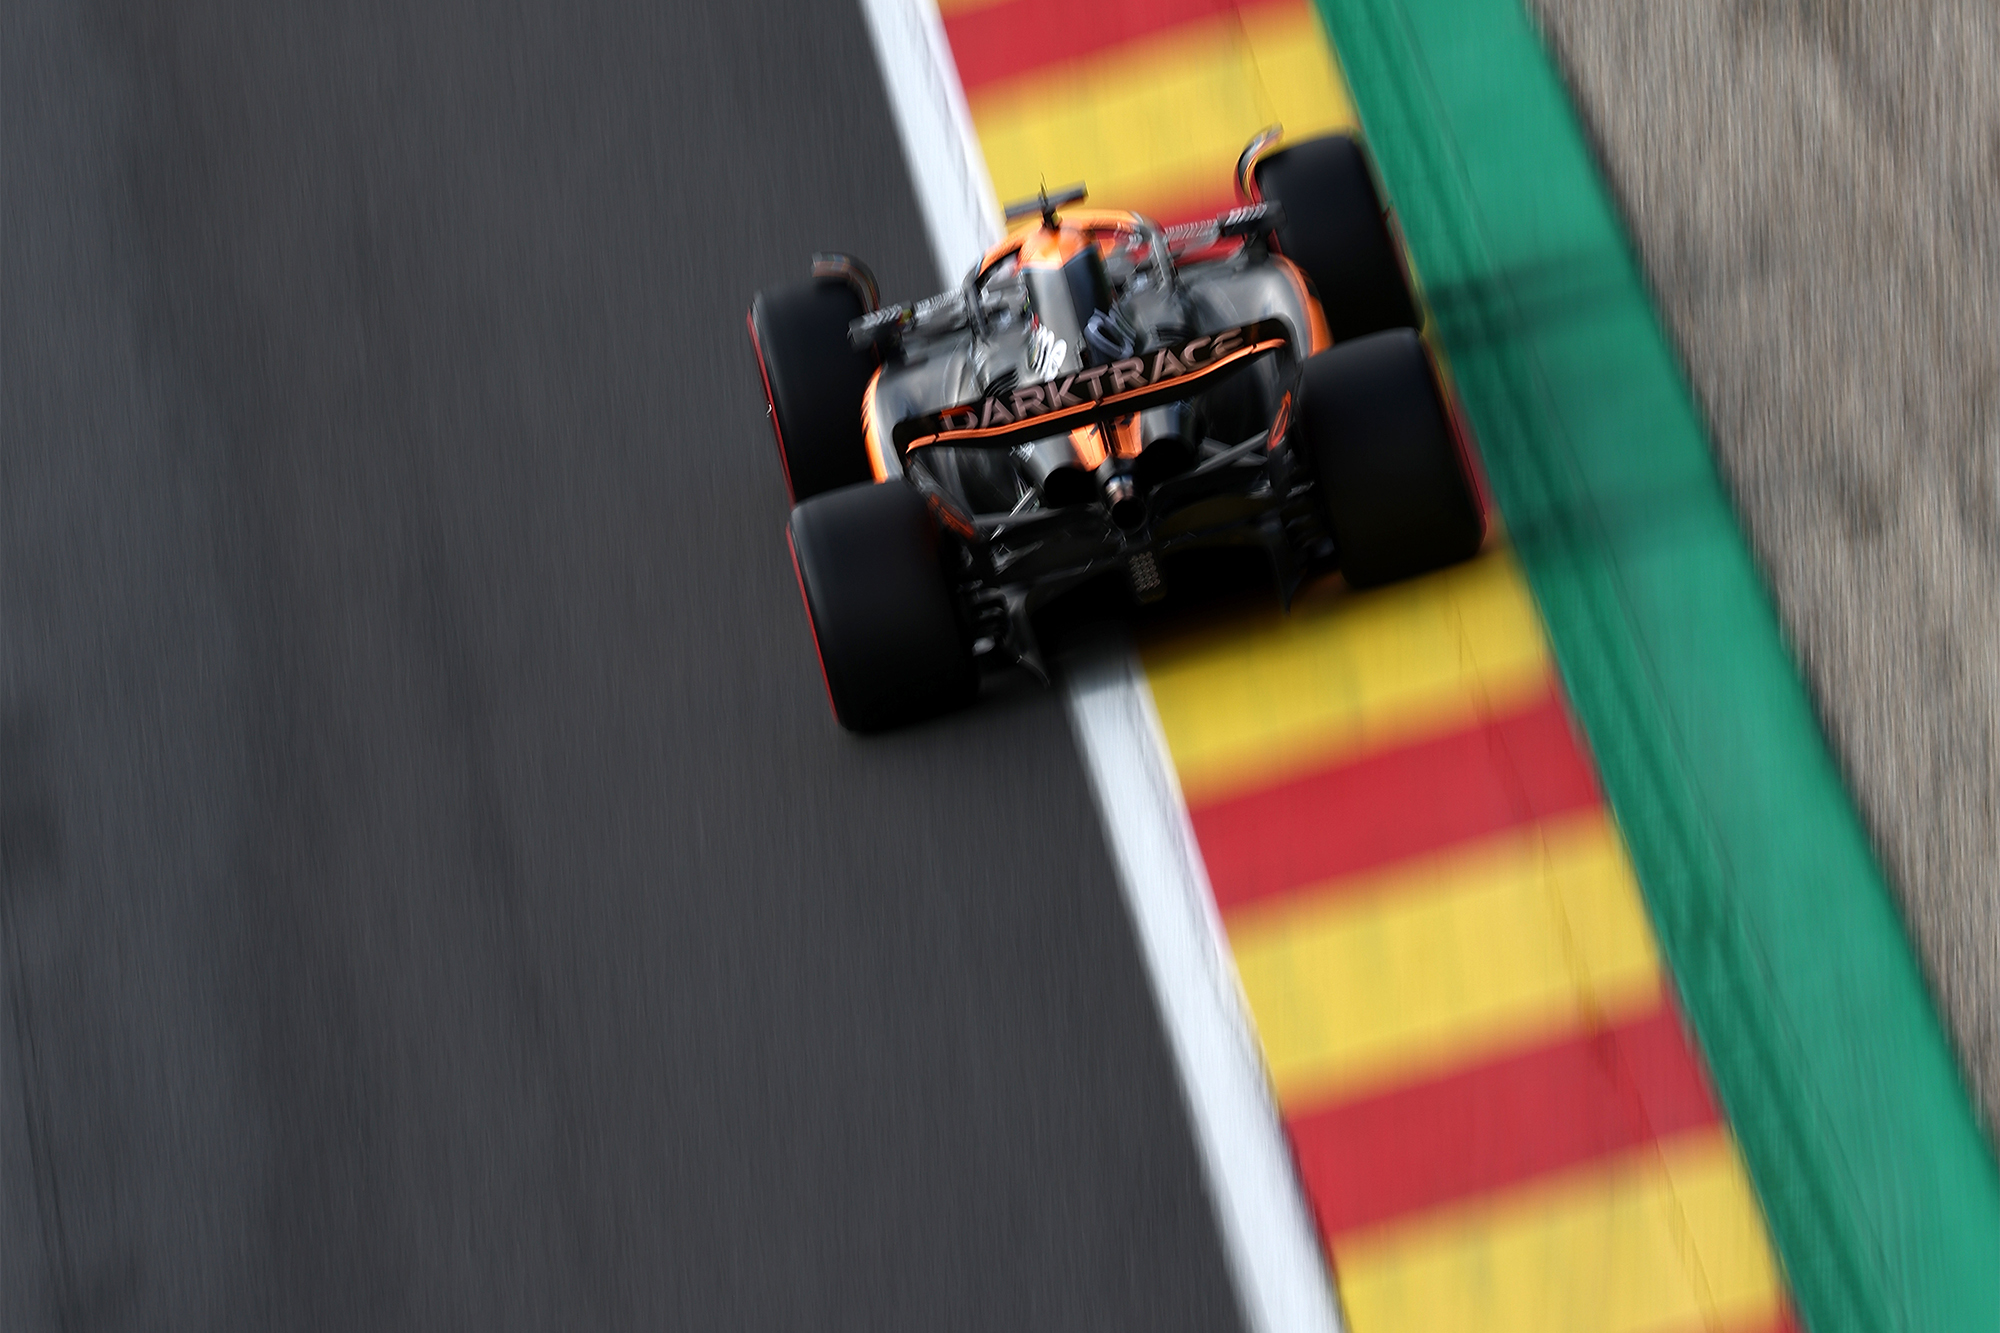 mark hughes: why verstappen, red bull and piastri thrive at spa